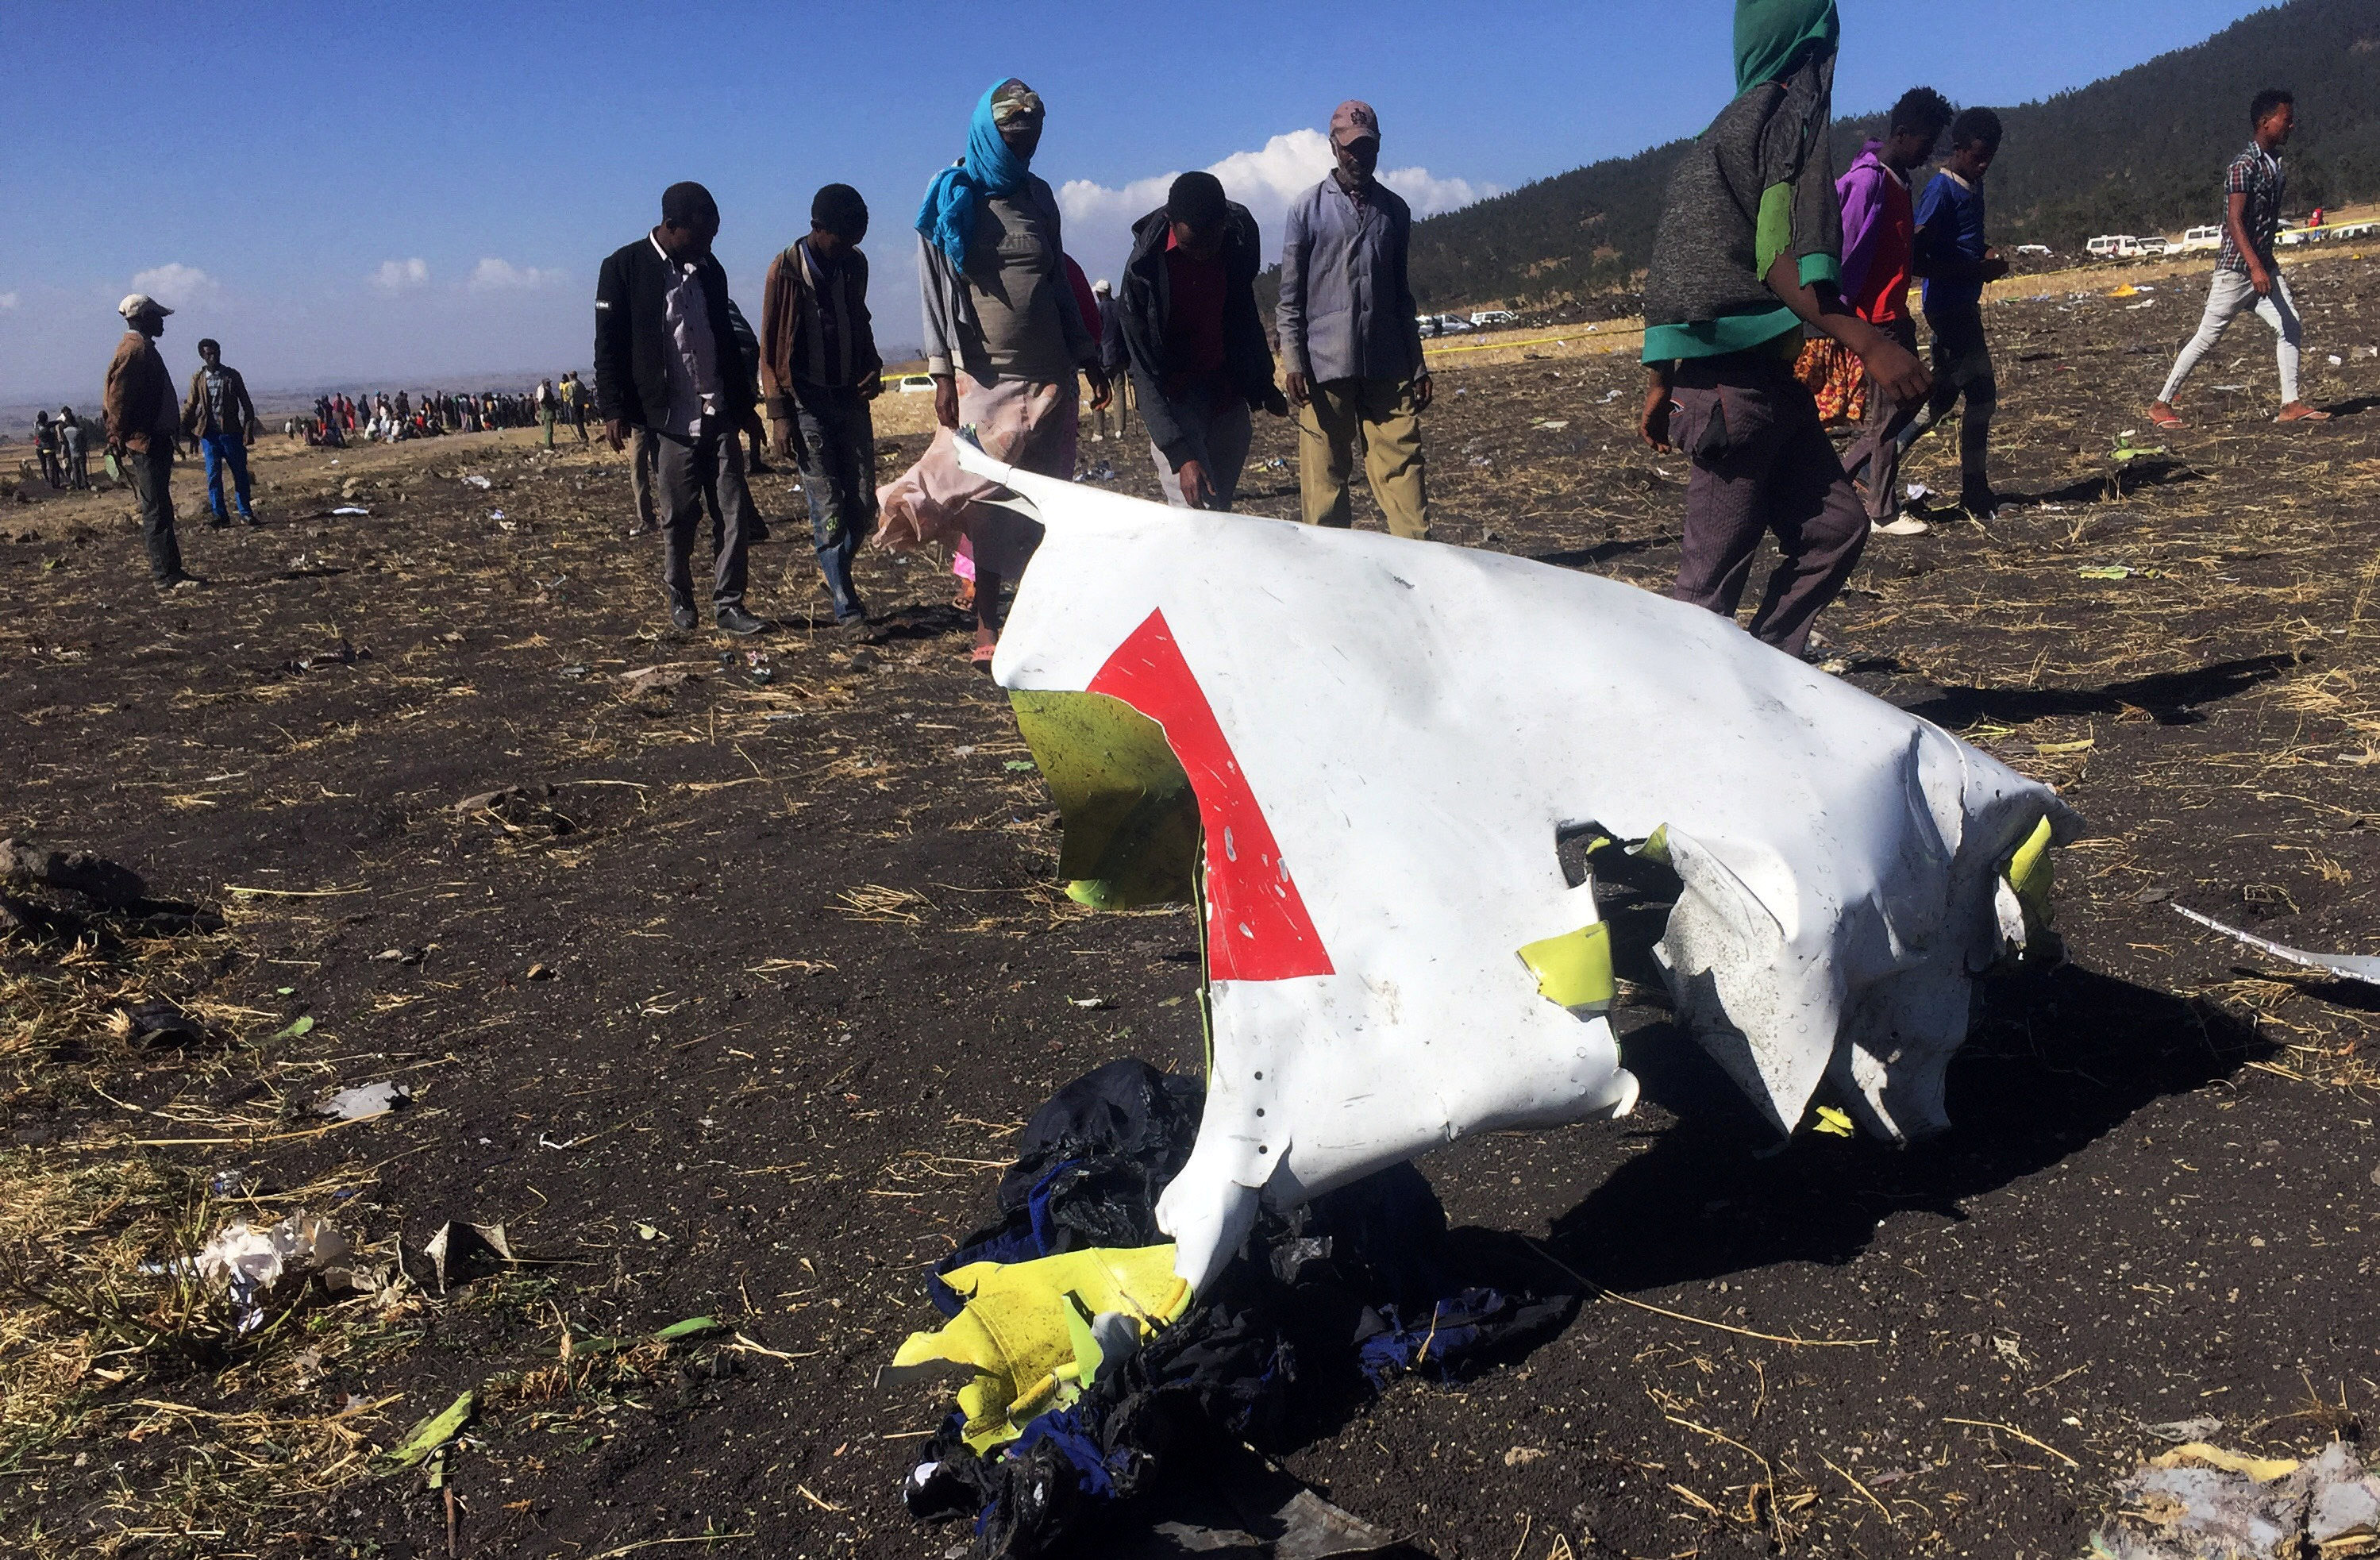 People walk past a part of the wreckage at the scene of the Ethiopian Airlines Flight ET 302 plane crash, near the town of Bishoftu, southeast of Addis Ababa